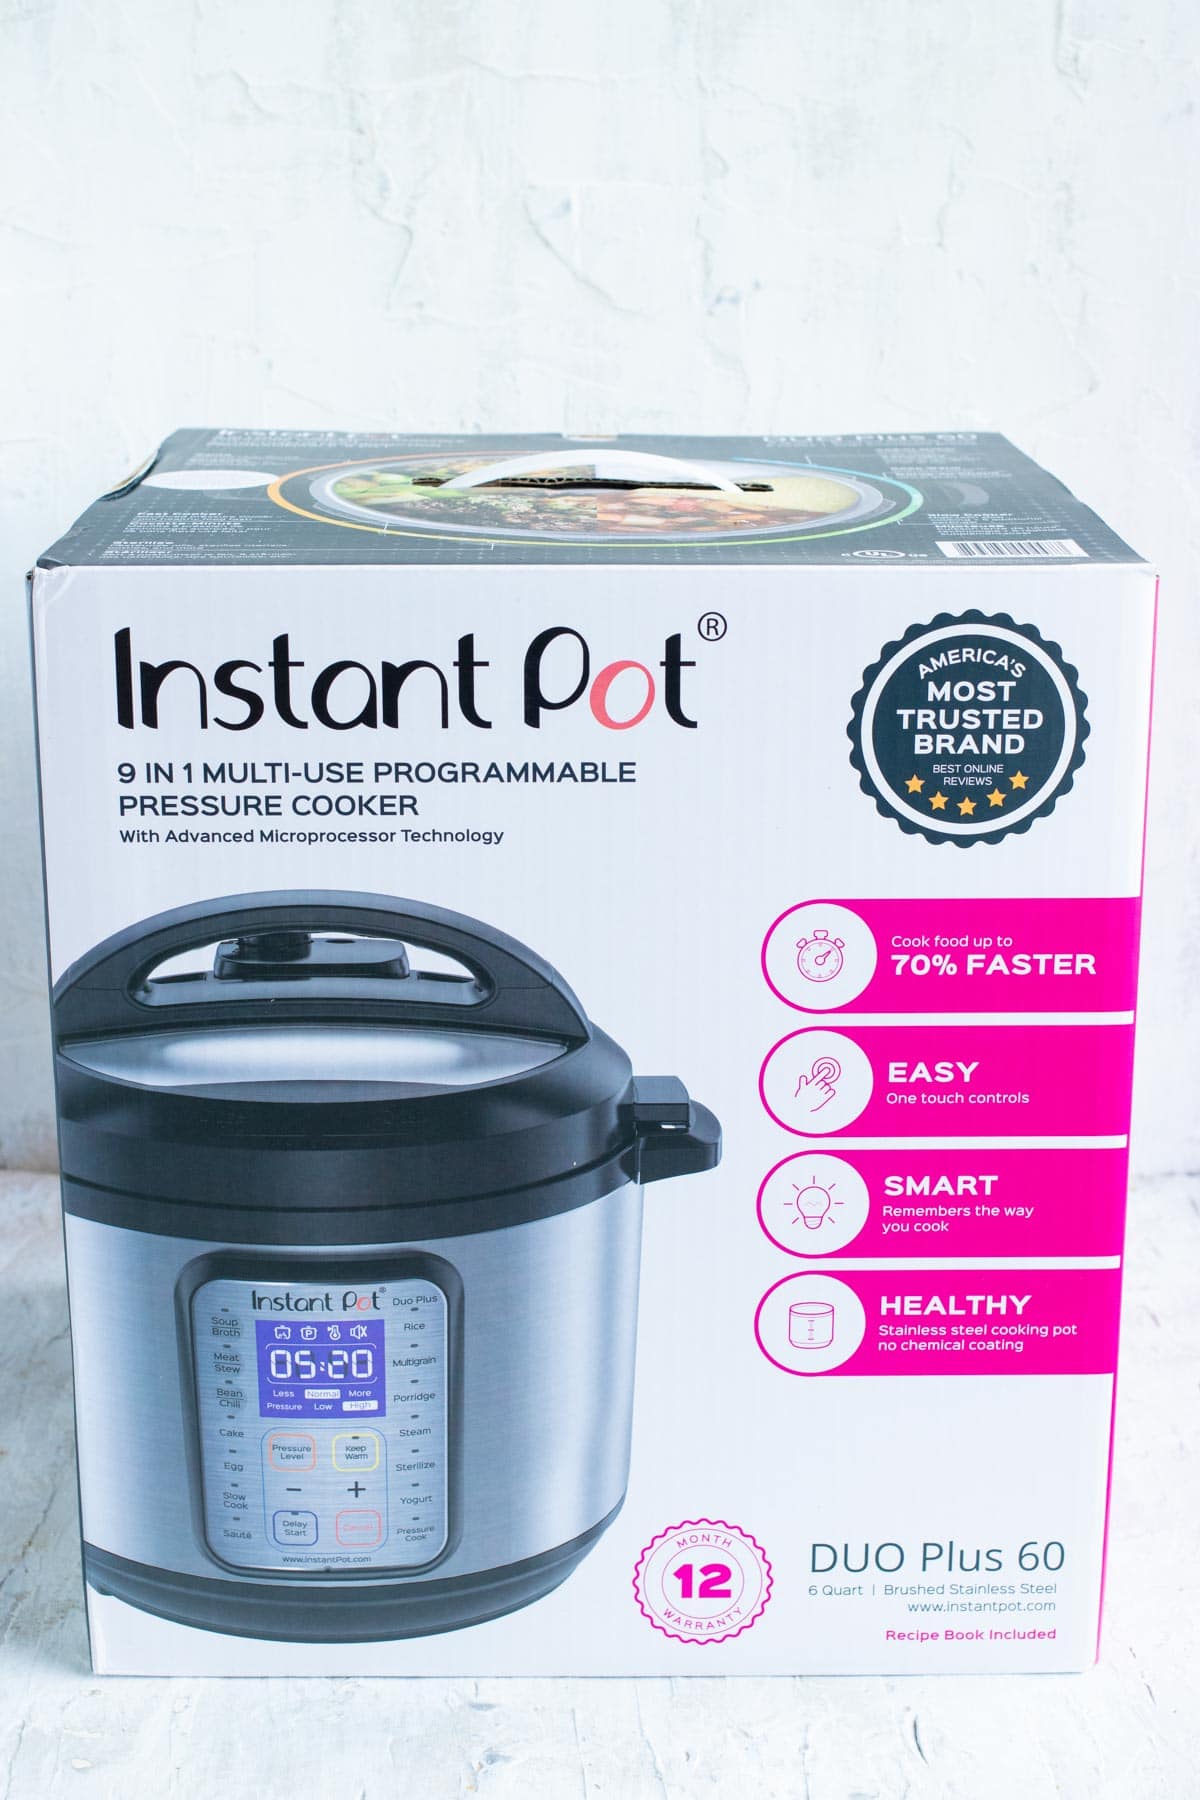 Instant Pot Guide: A Beginner's Guide to Using Your Pressure